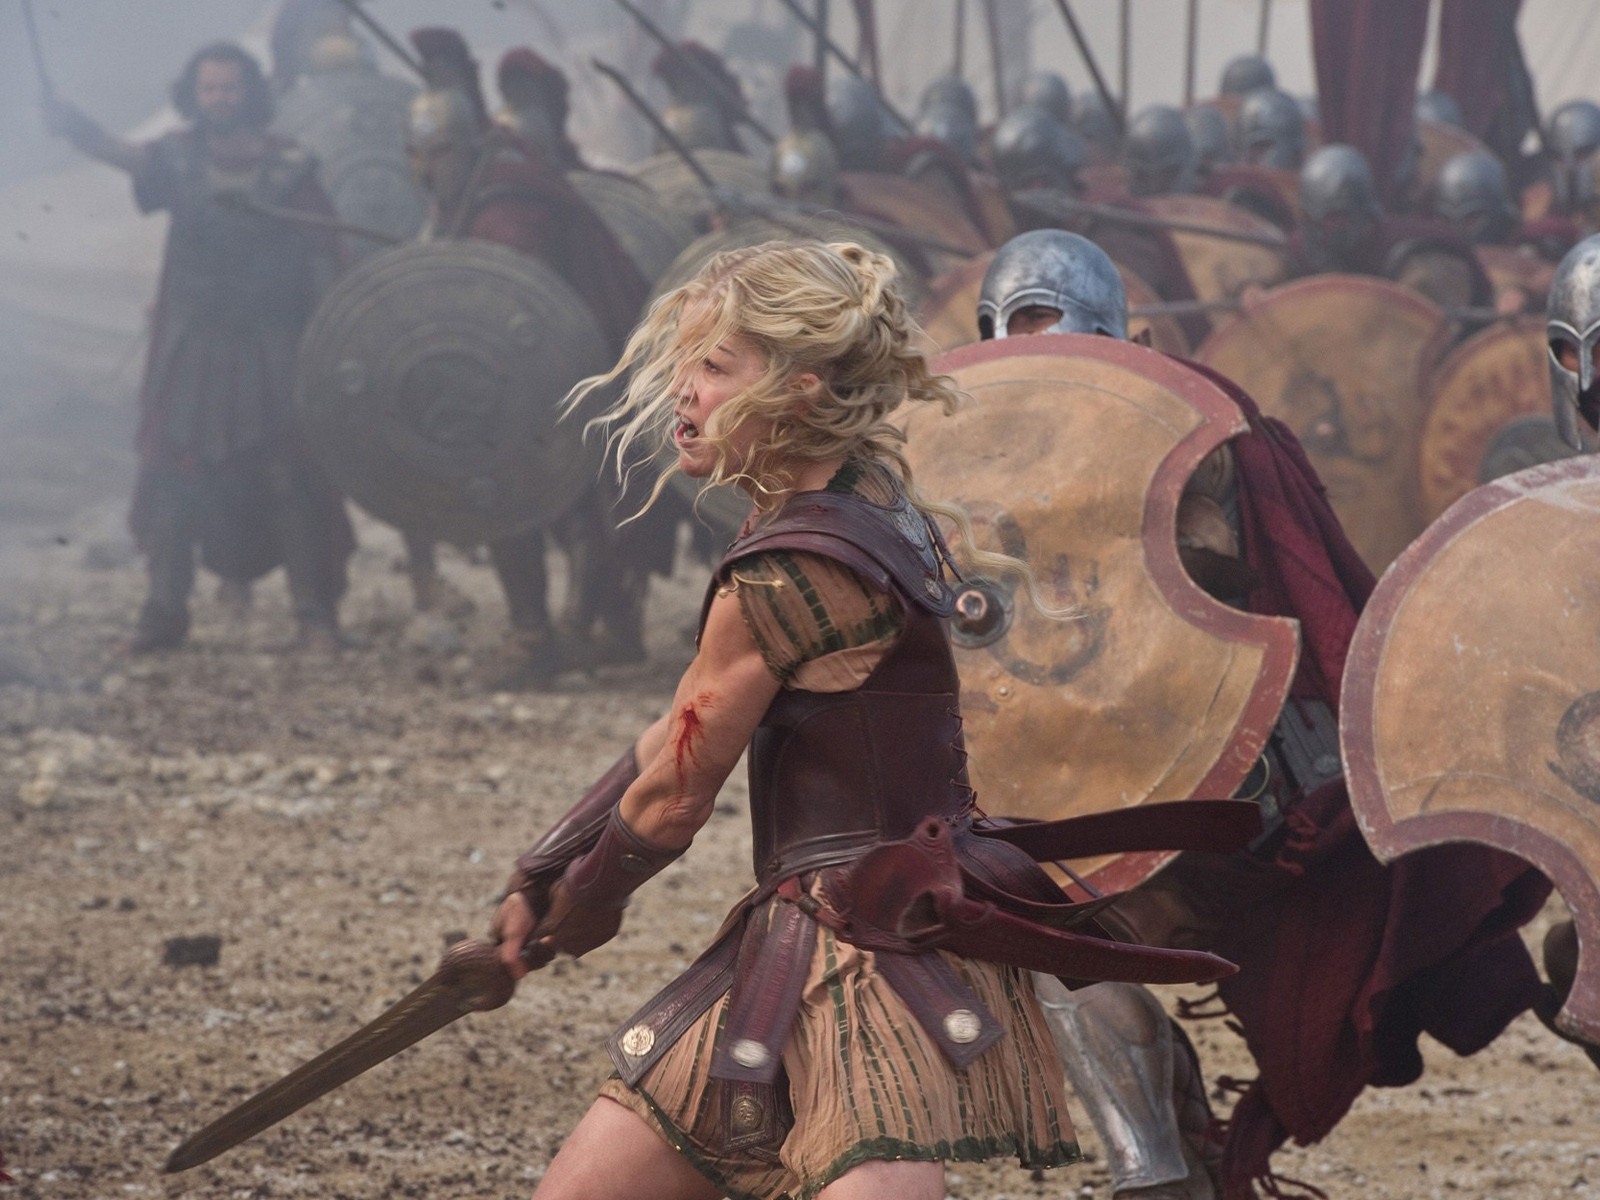 Wrath of the Titans HD Wallpapers #8 - 1600x1200